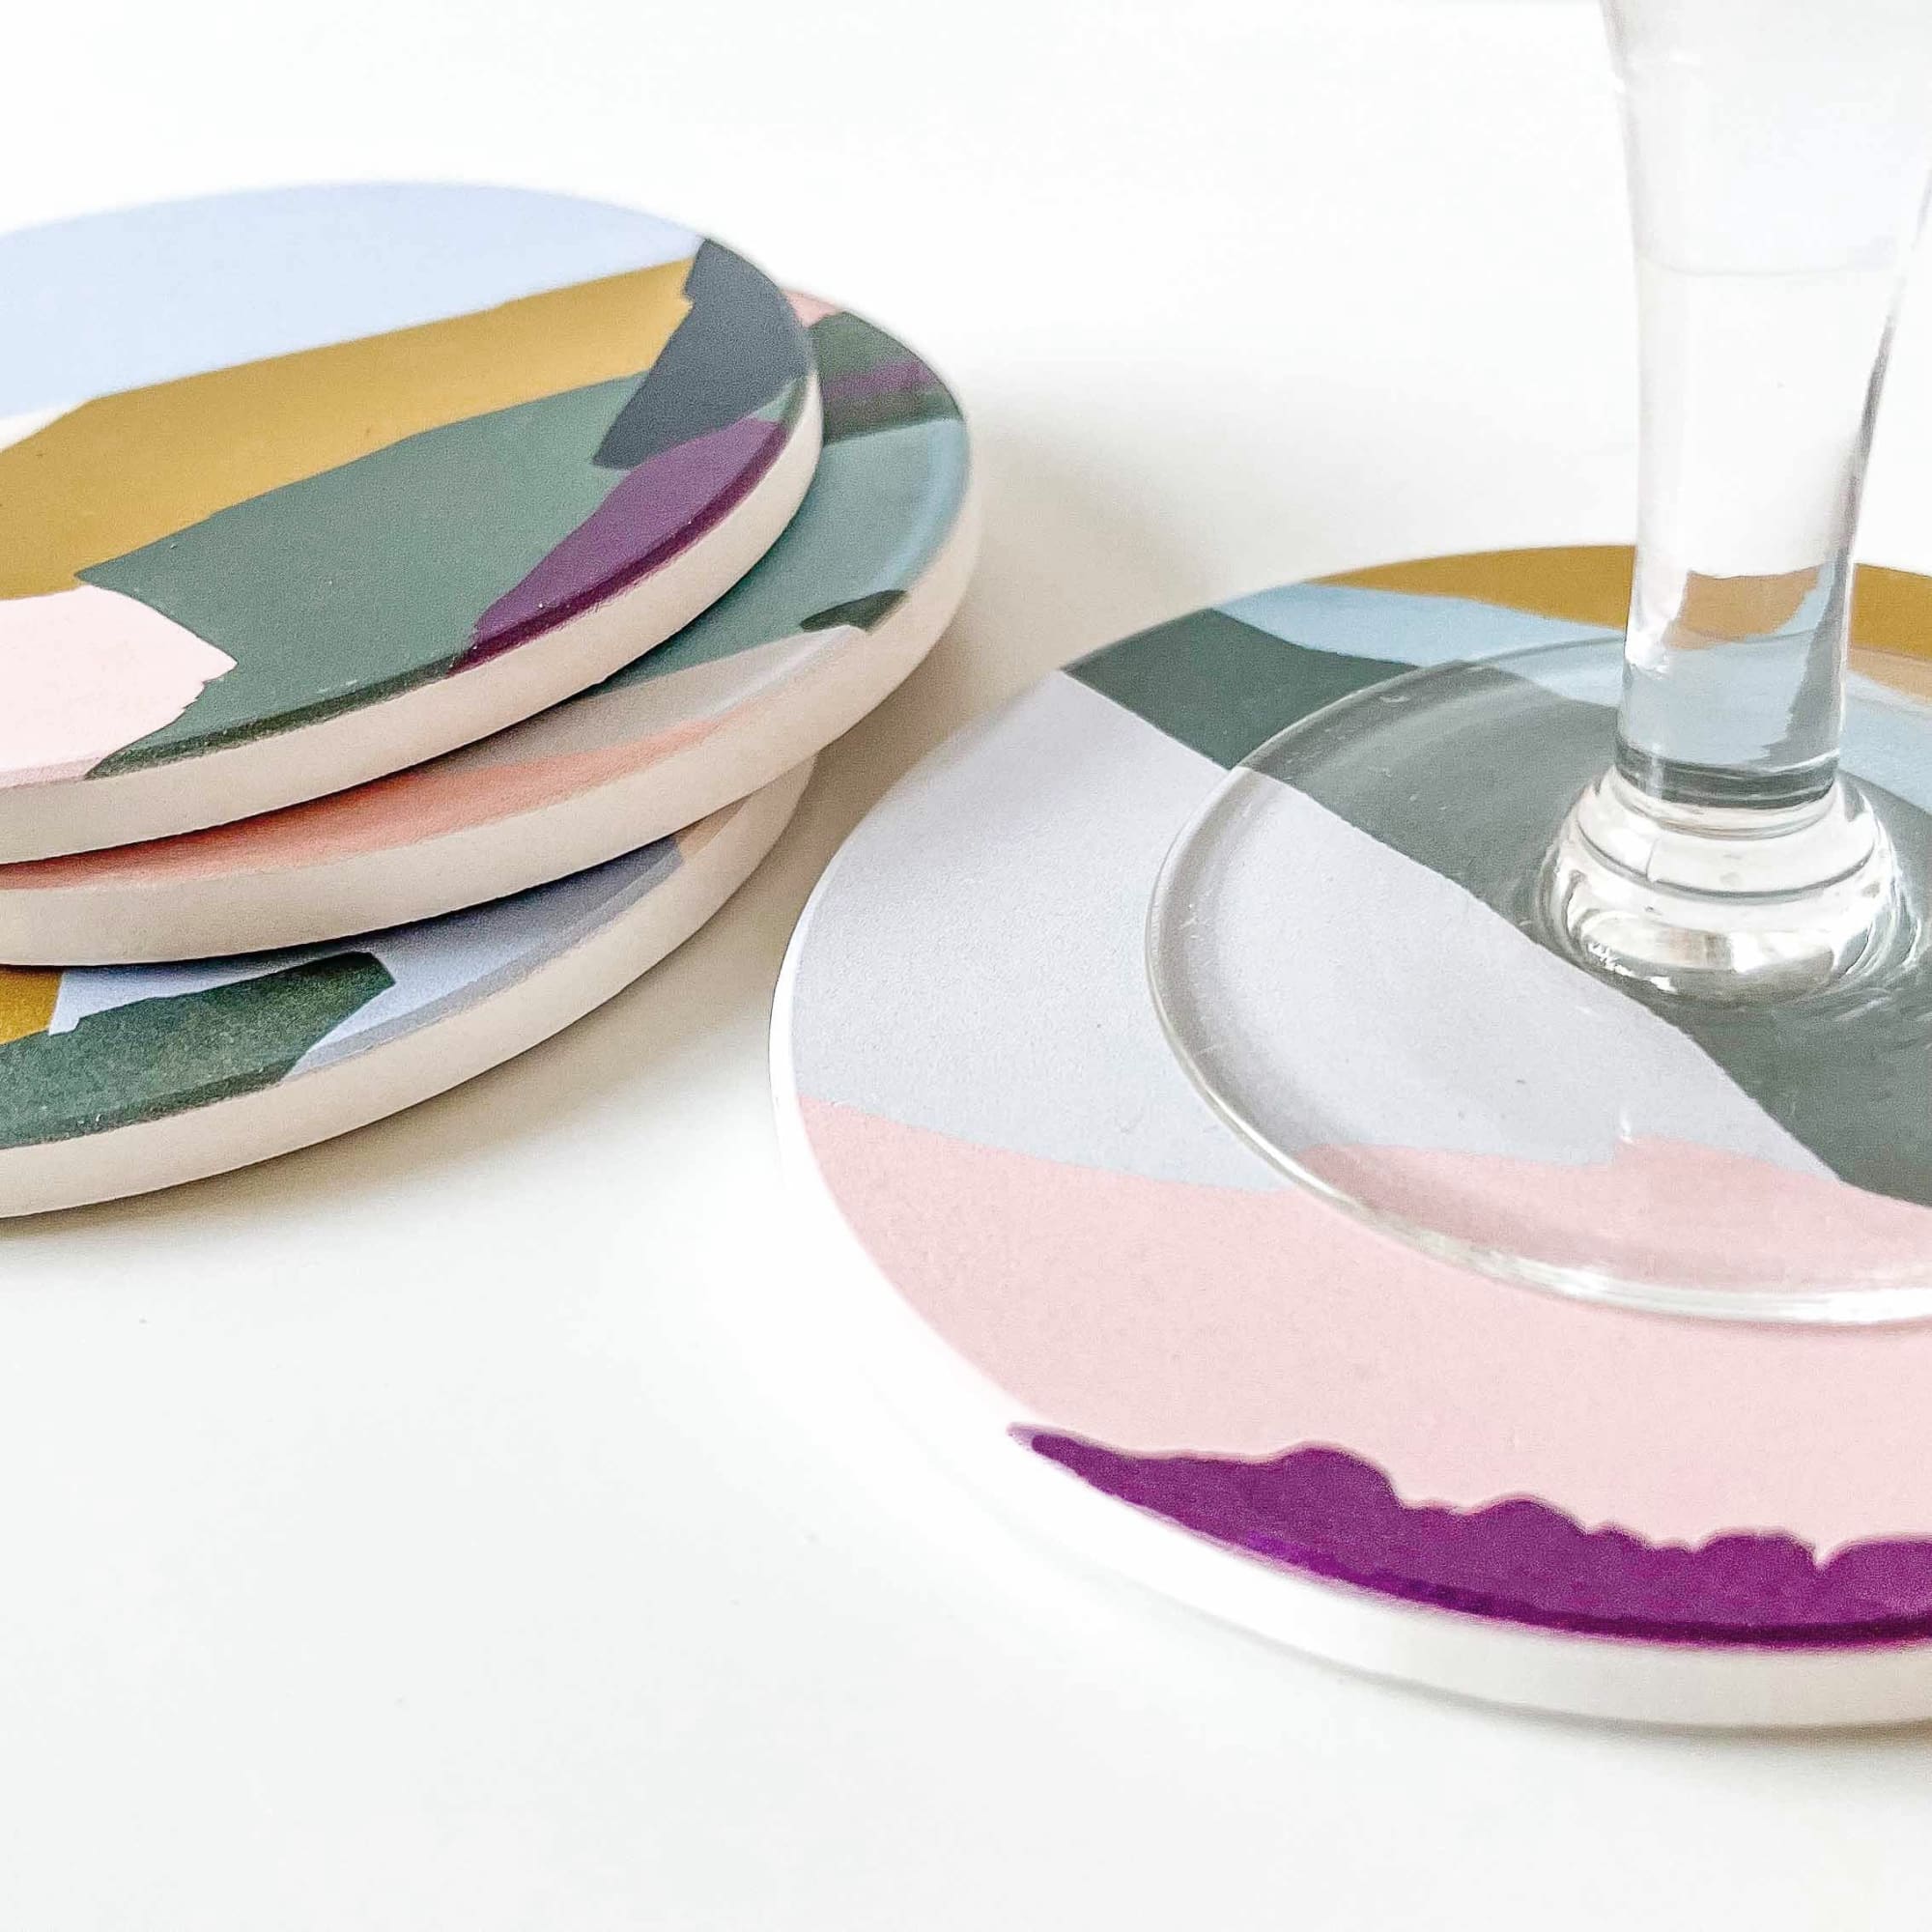 Absorbent Ceramic Coasters Set - Pacific Slopes | The Baltic Club